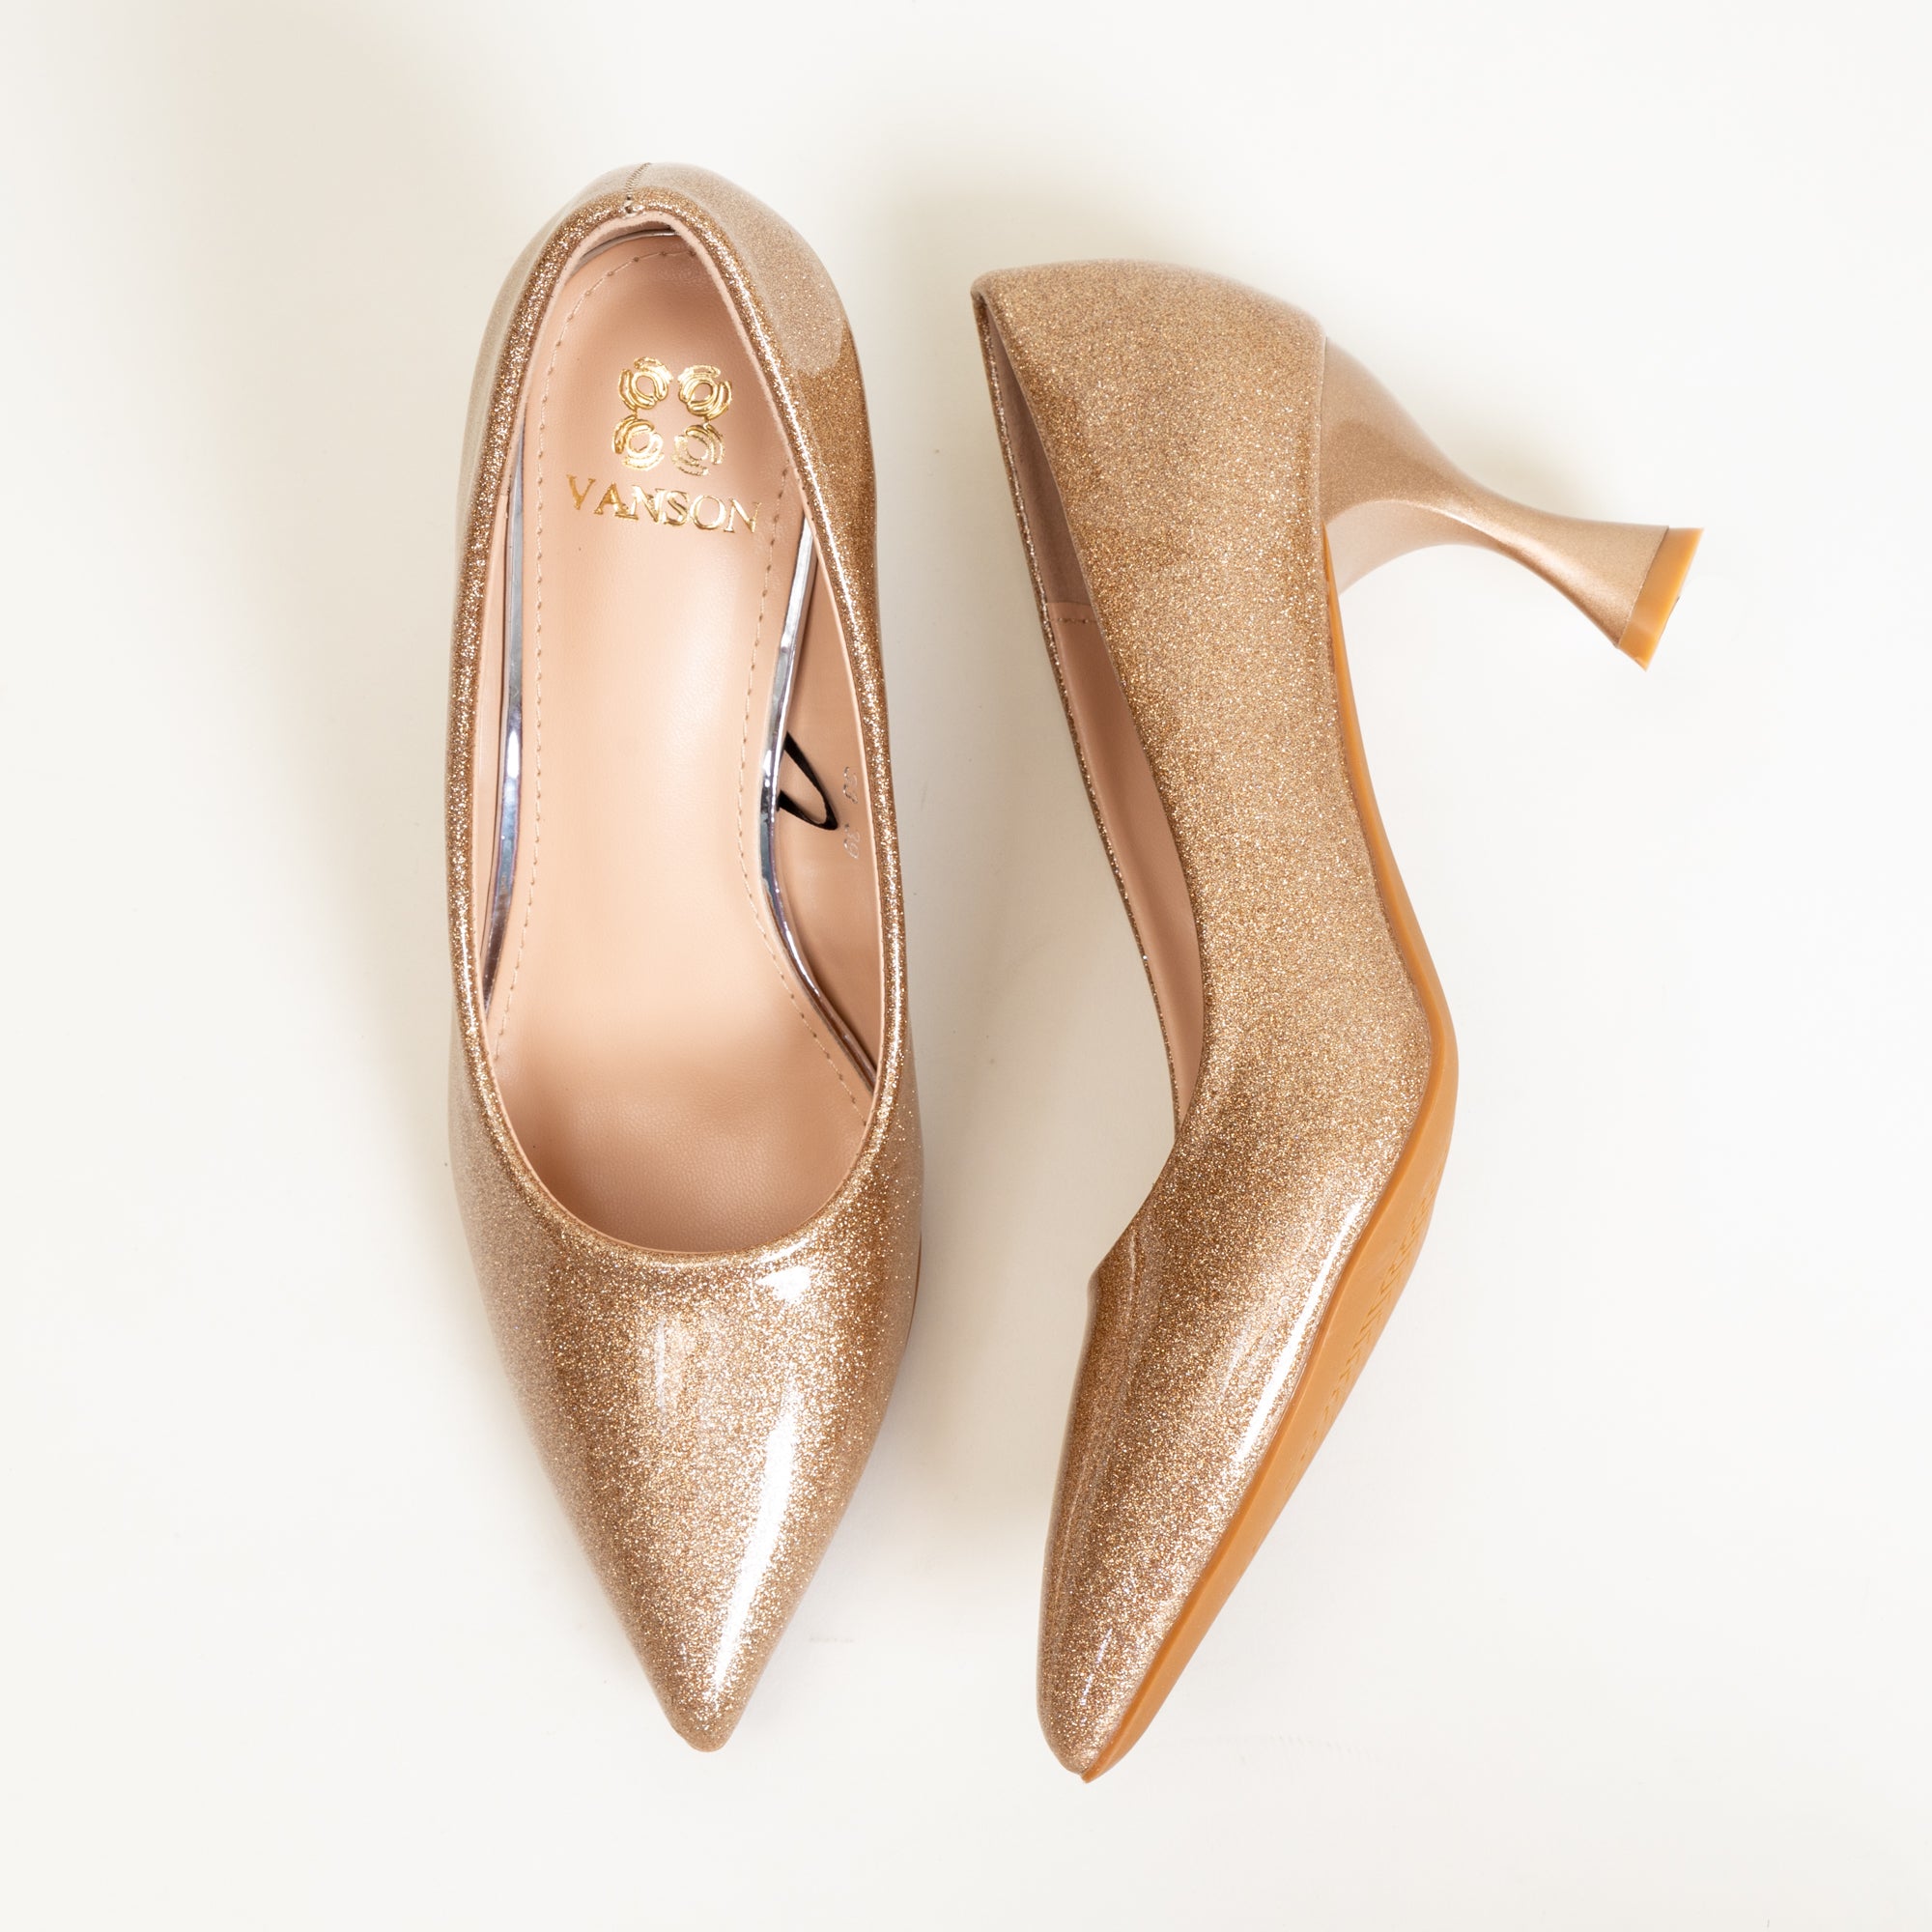 DOROTHY's DREAM-Party Wear Pumps in-Champagne.